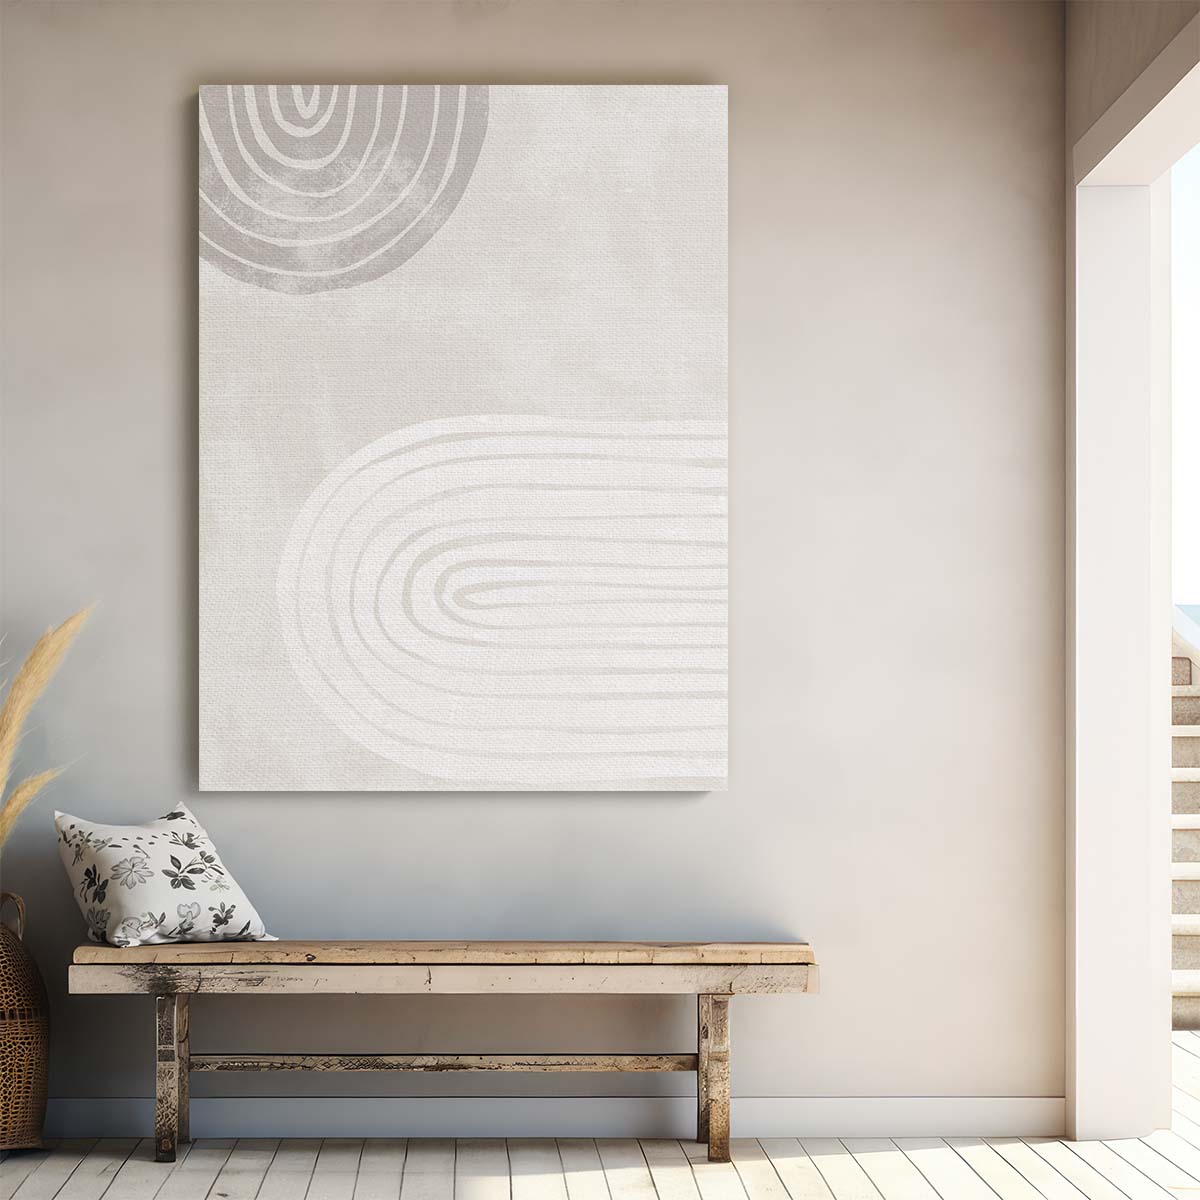 Abstract Geometric Illustration - Symmetrical Arches in Beige & Gray by Luxuriance Designs, made in USA